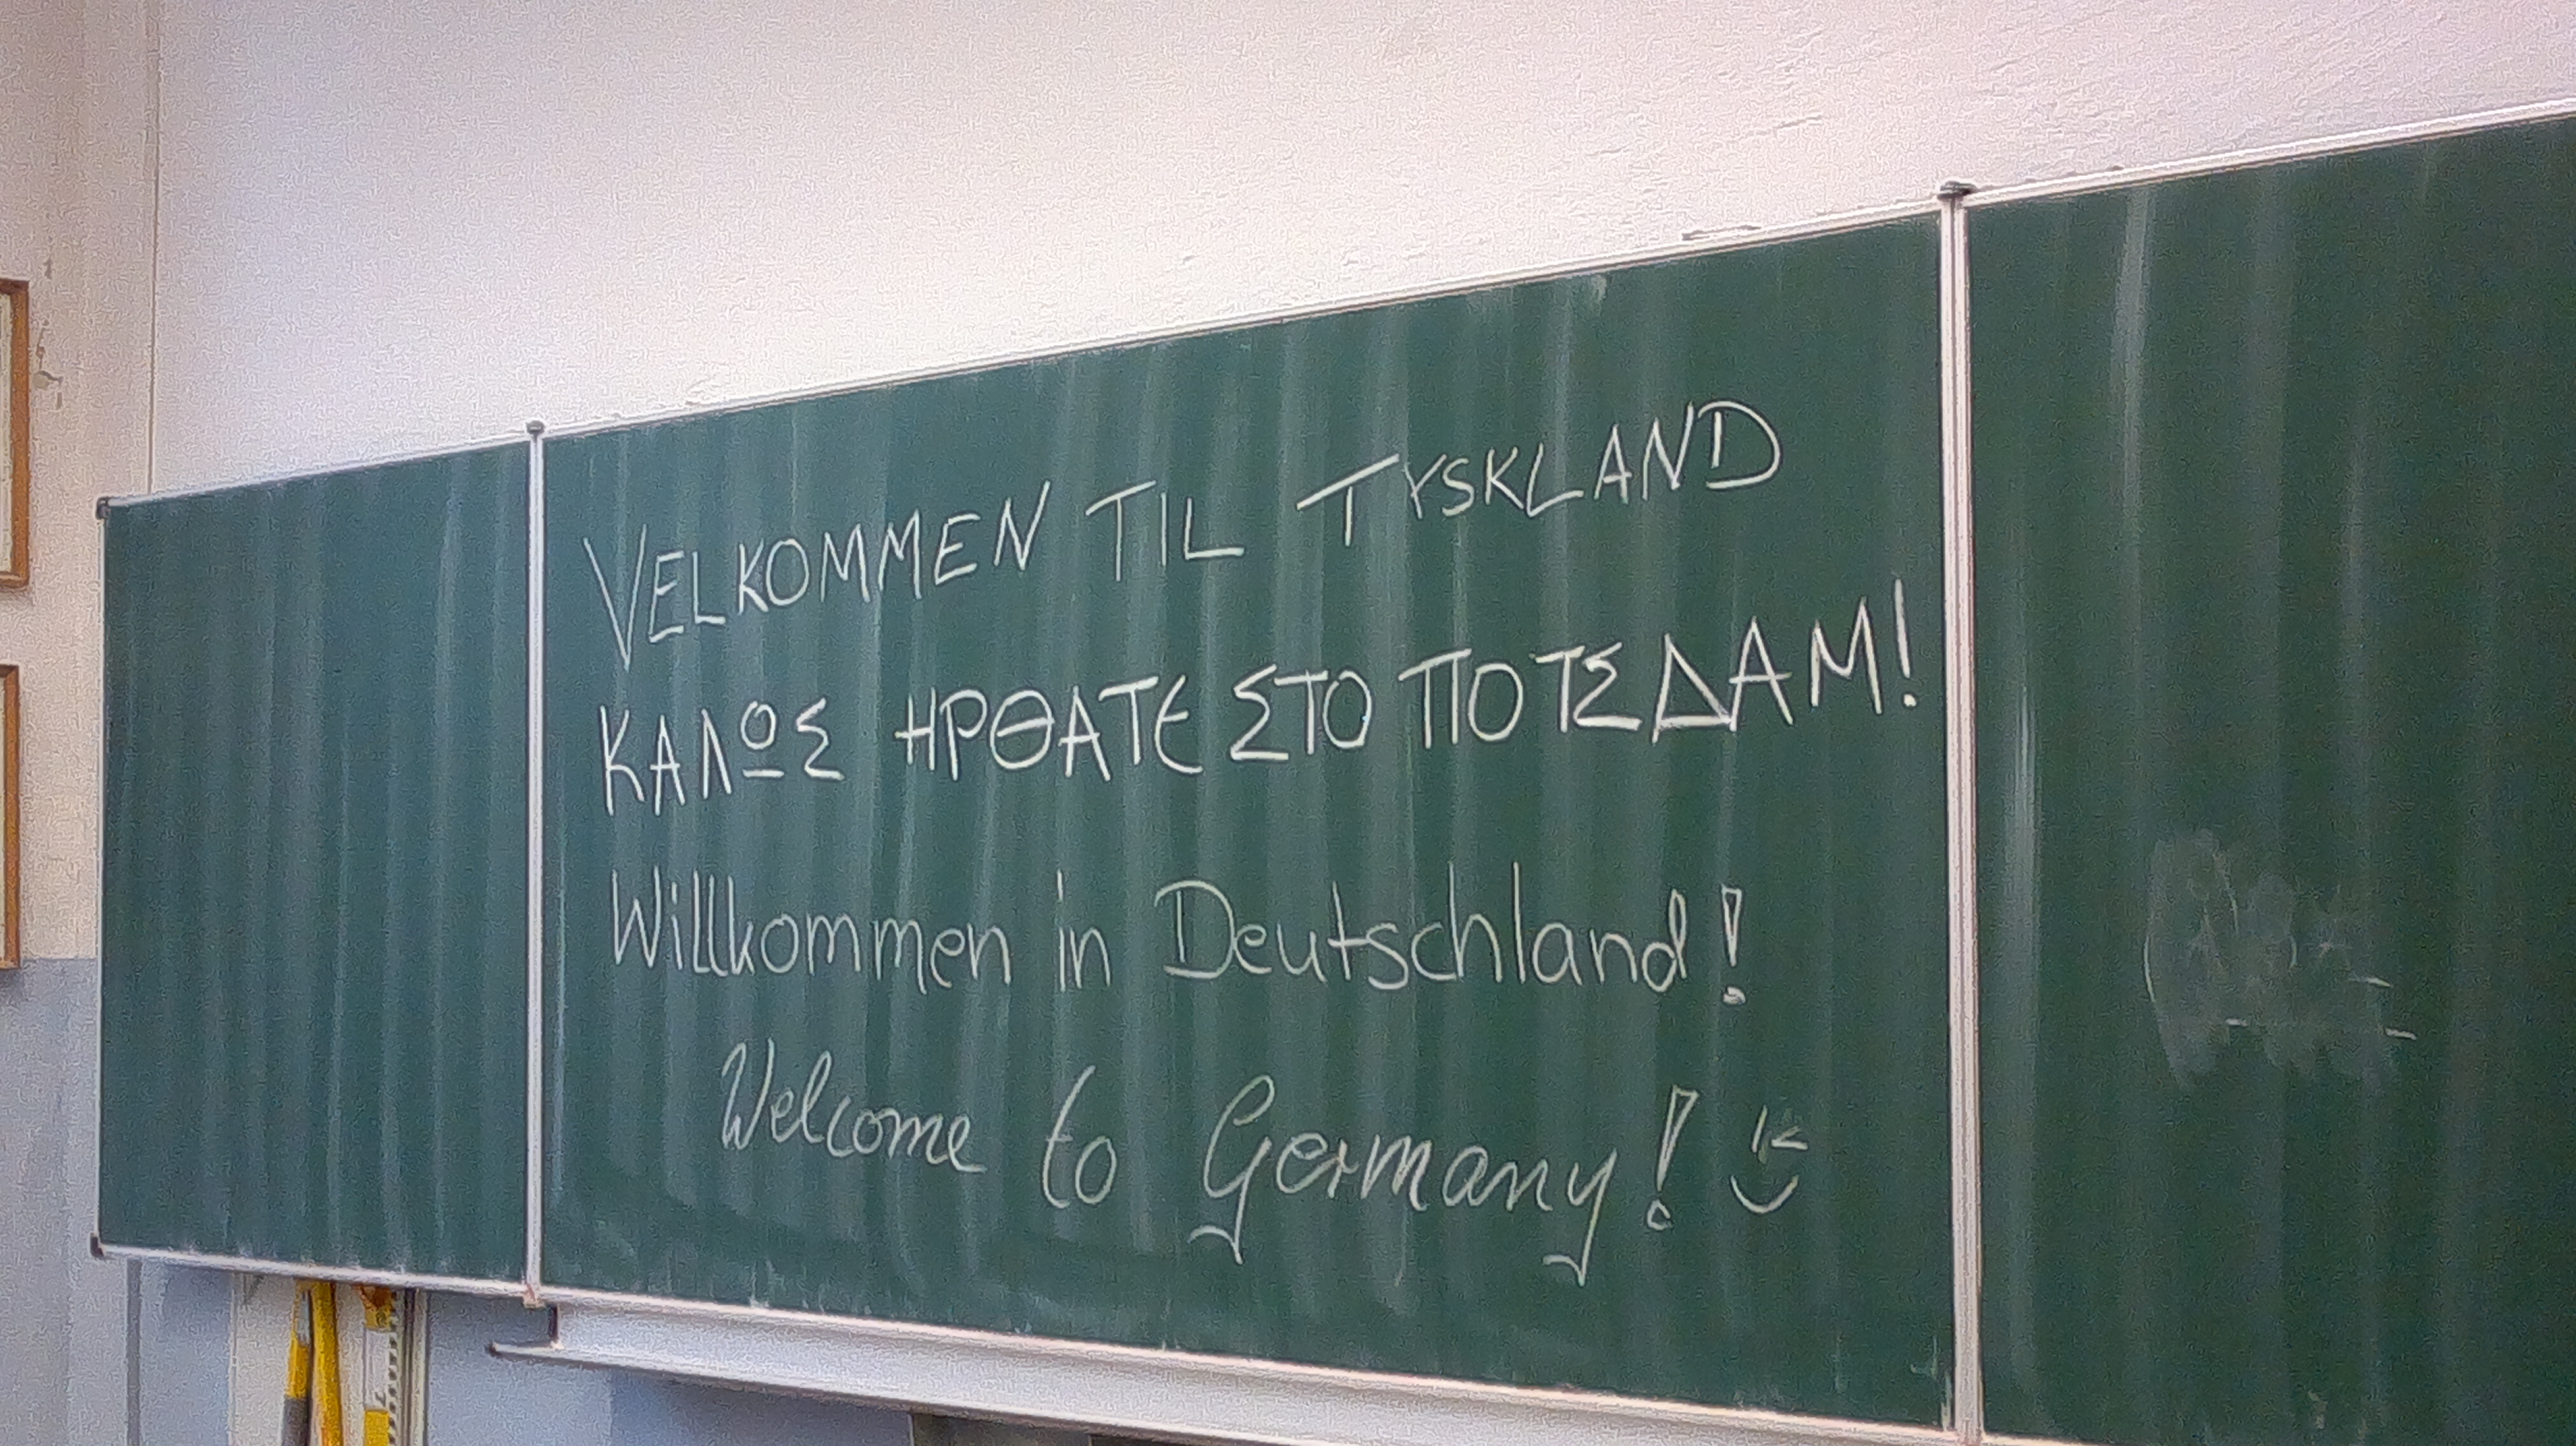 Welcome To Potsdam!